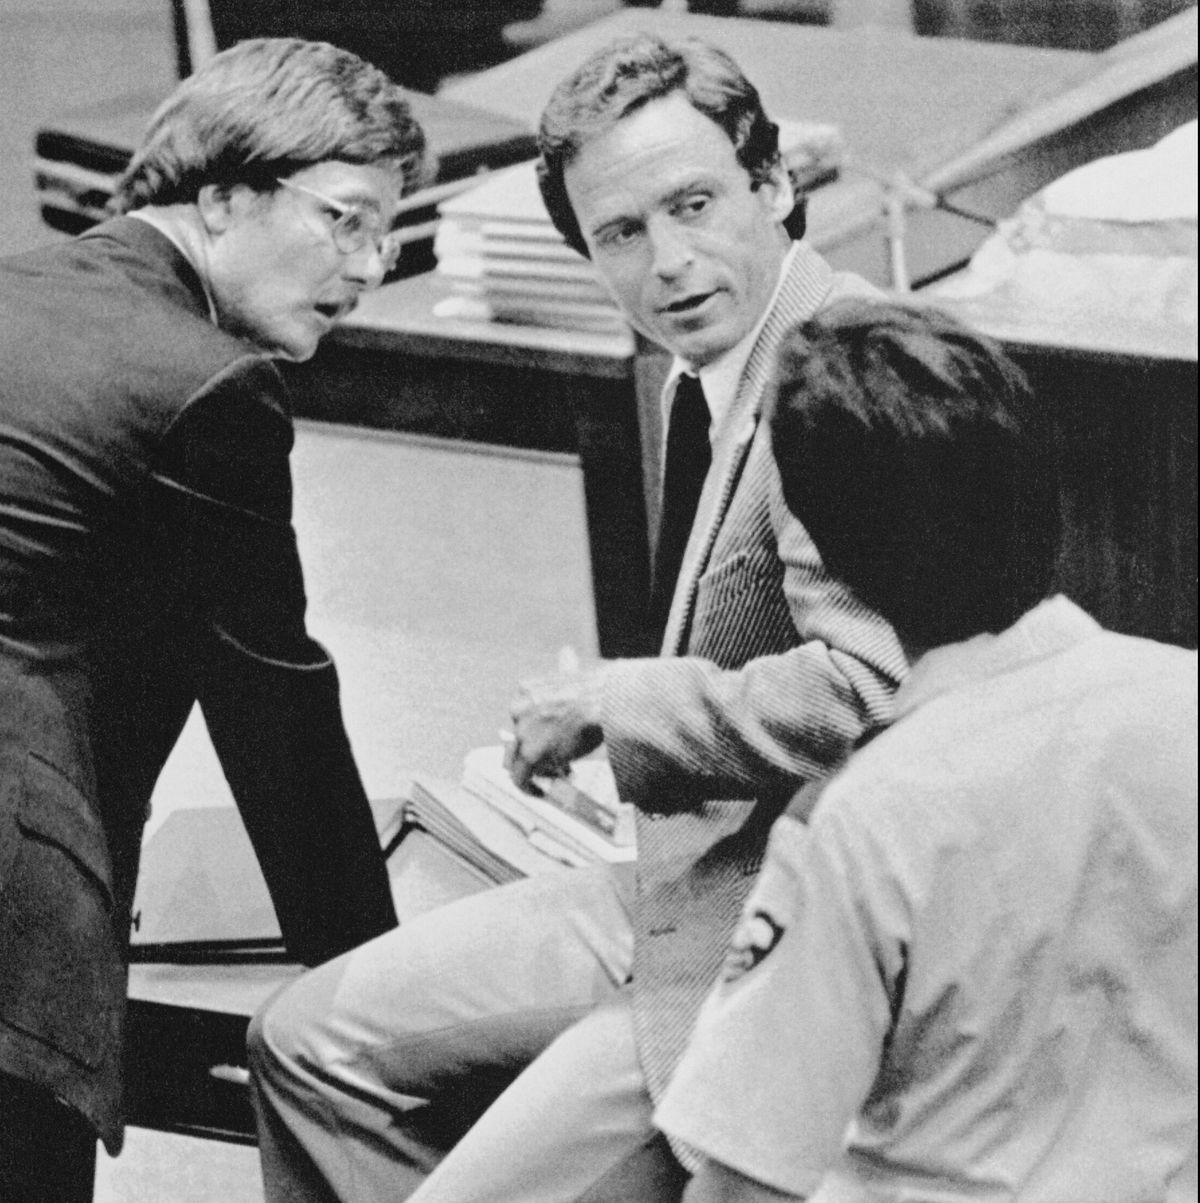 Ted Bundy with Ed Harvey in Court Room During Trial